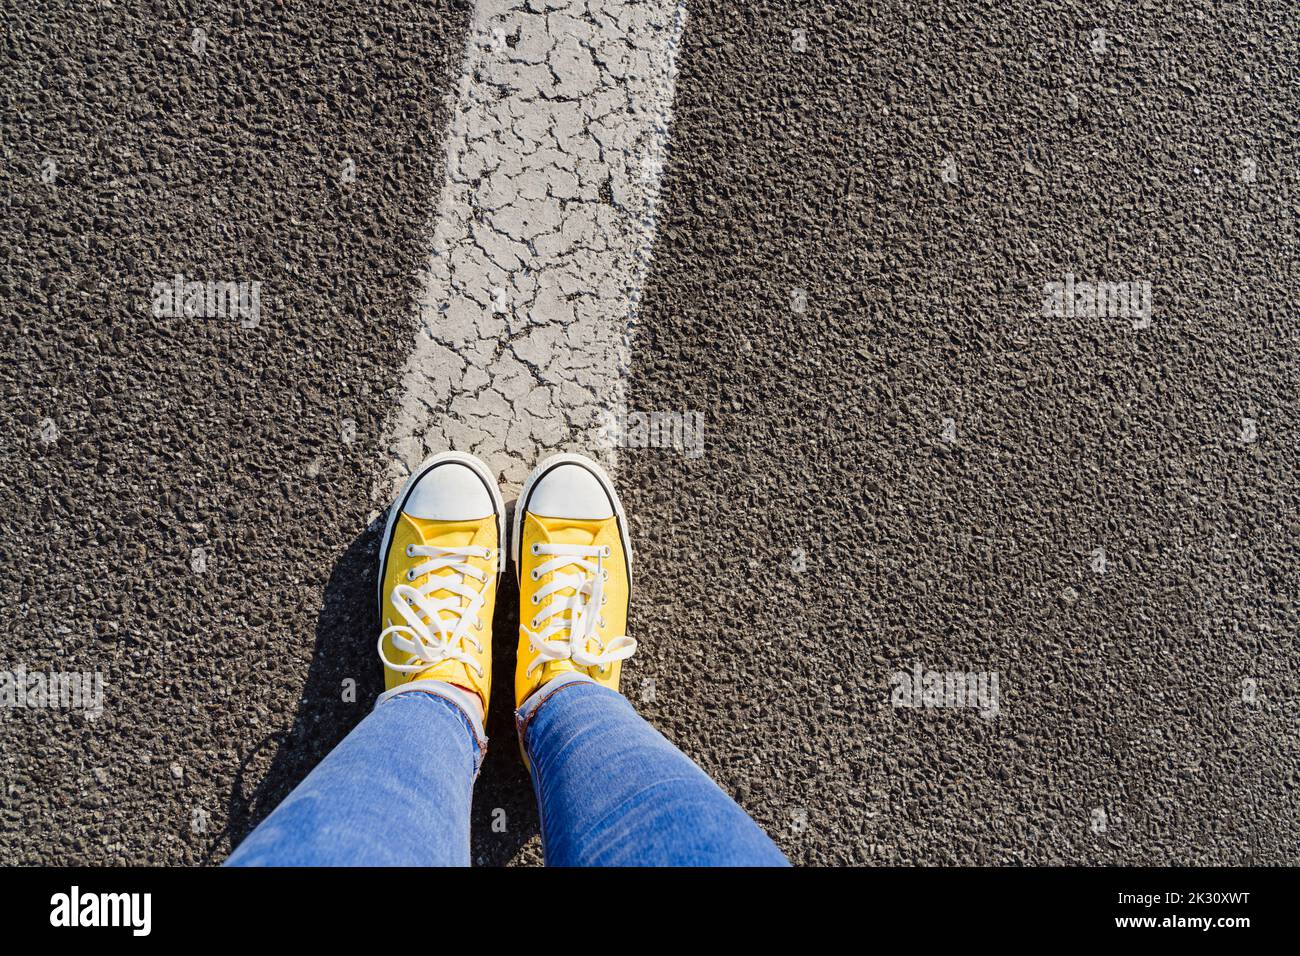 Woman standing on white painted dividing line Stock Photo